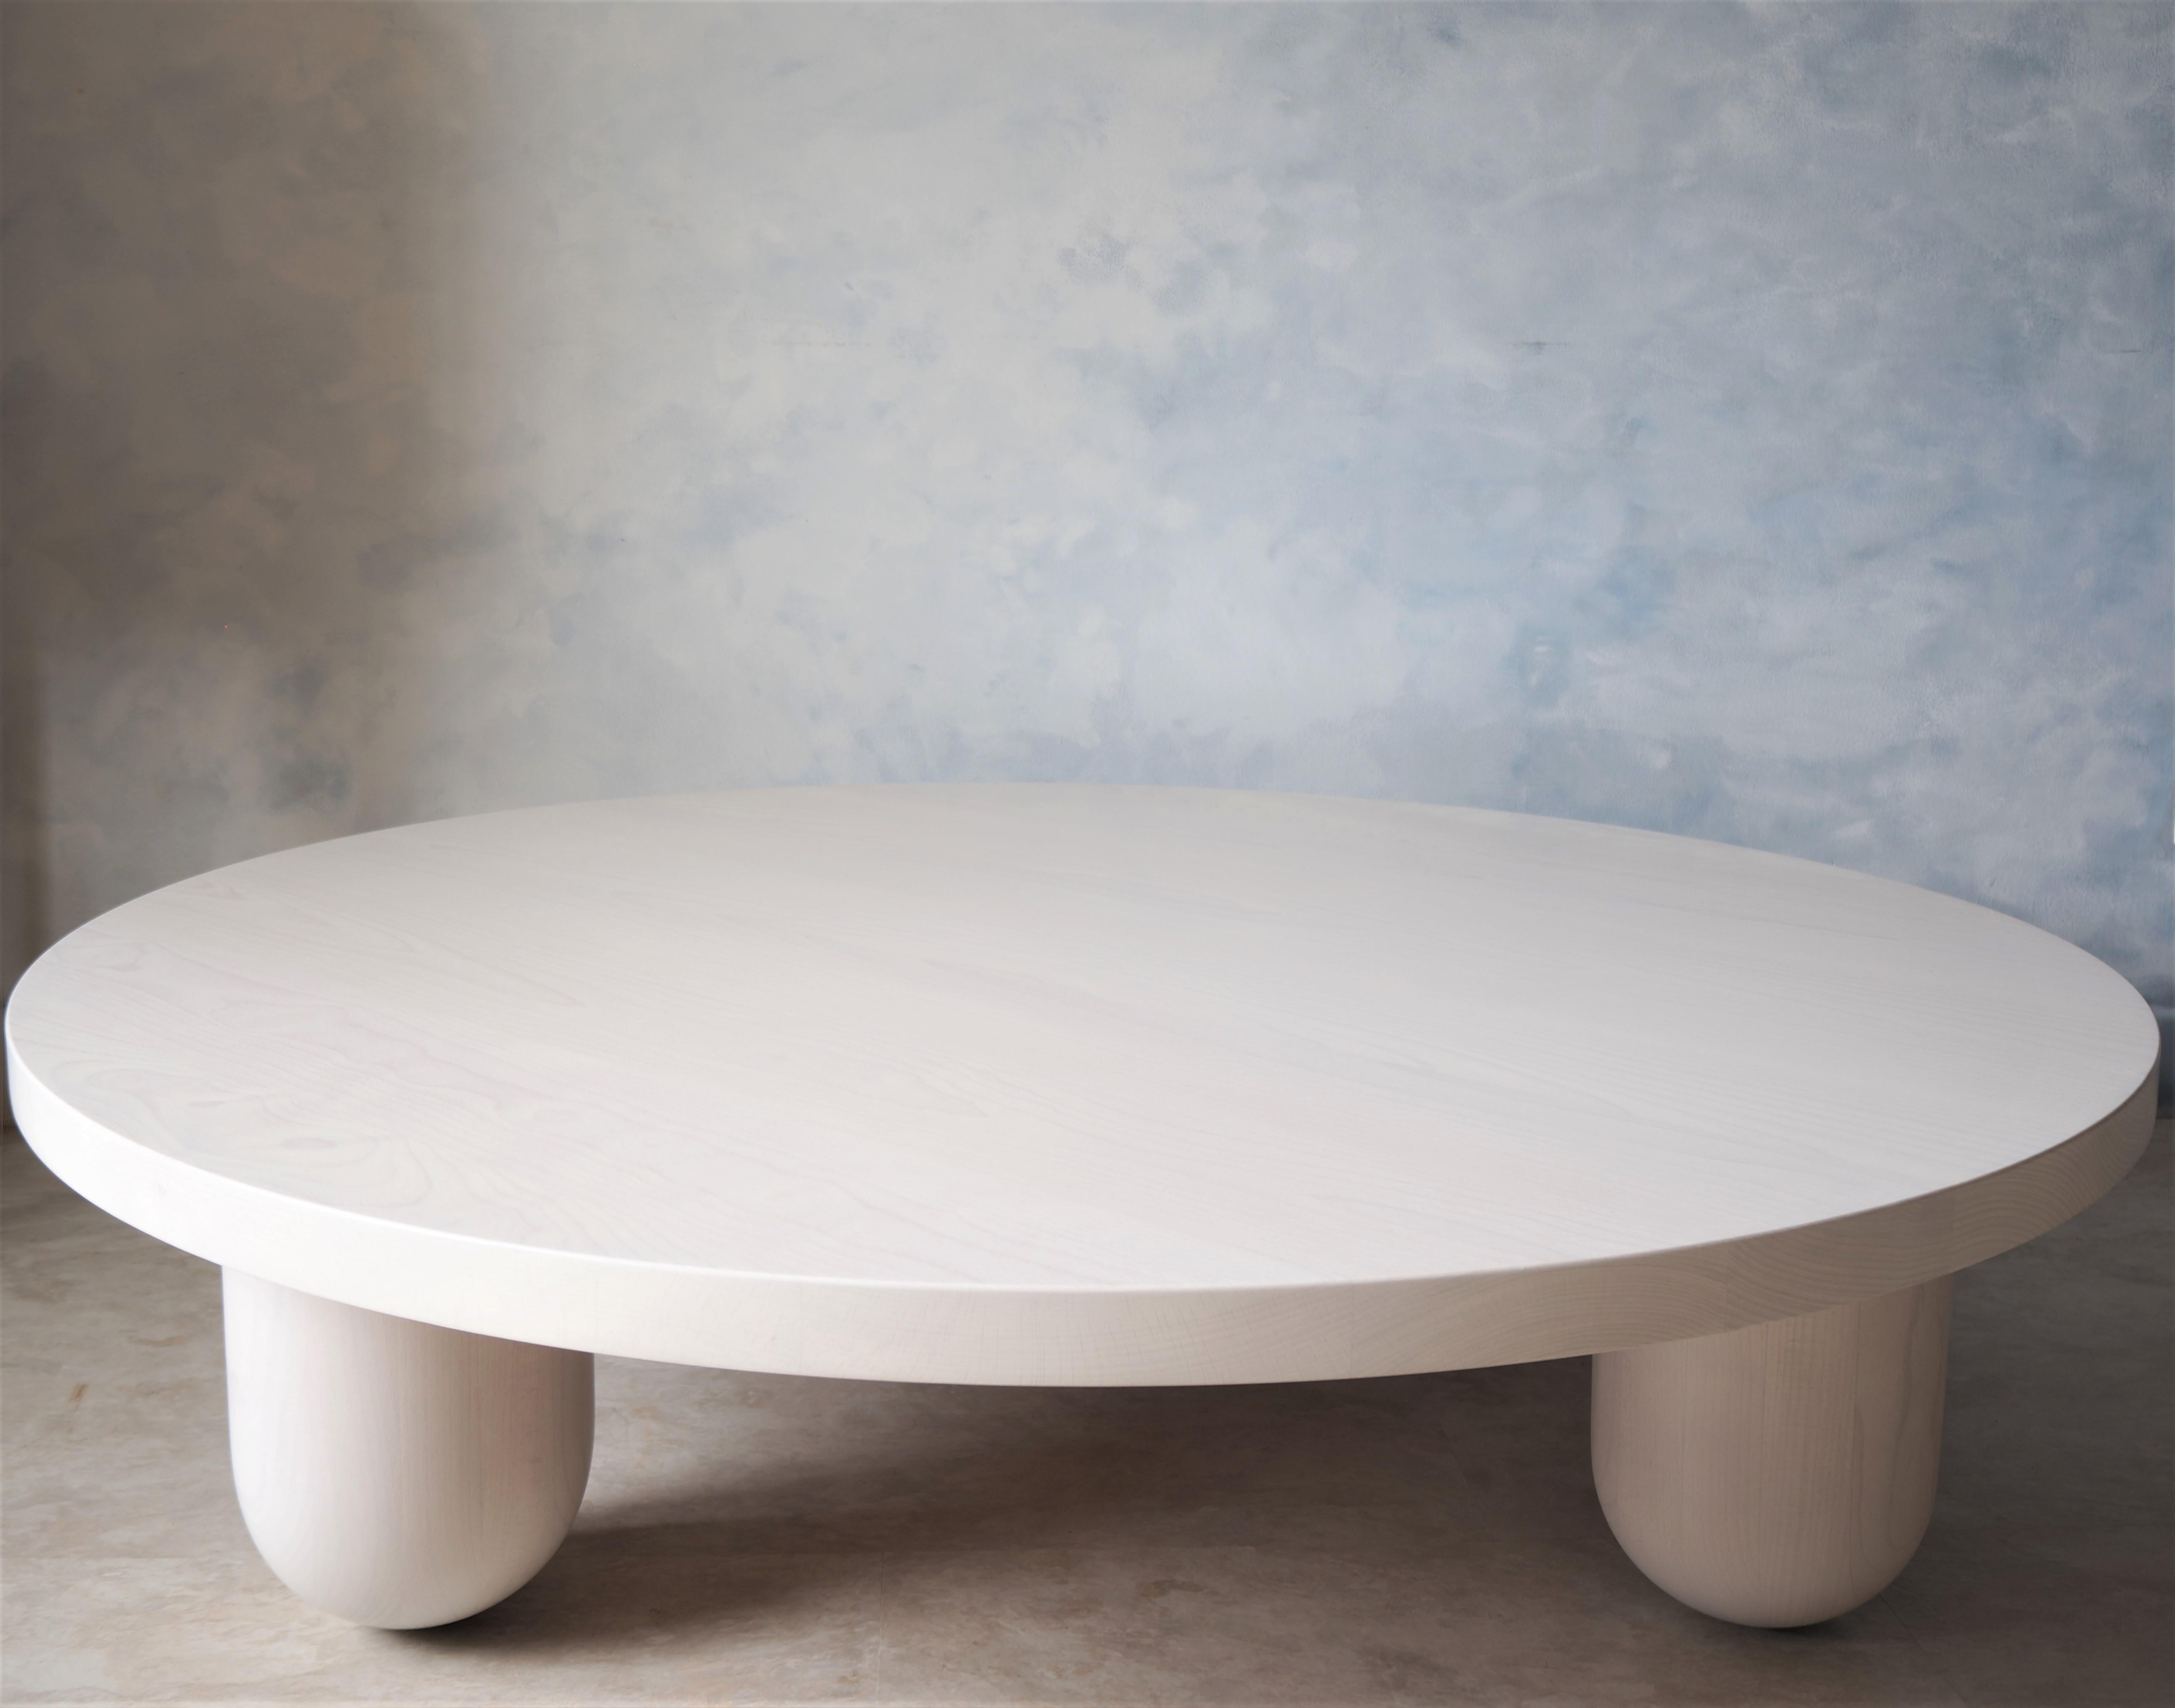 Beech Large Round White Column Coffee Table by MSJ Furniture Studio